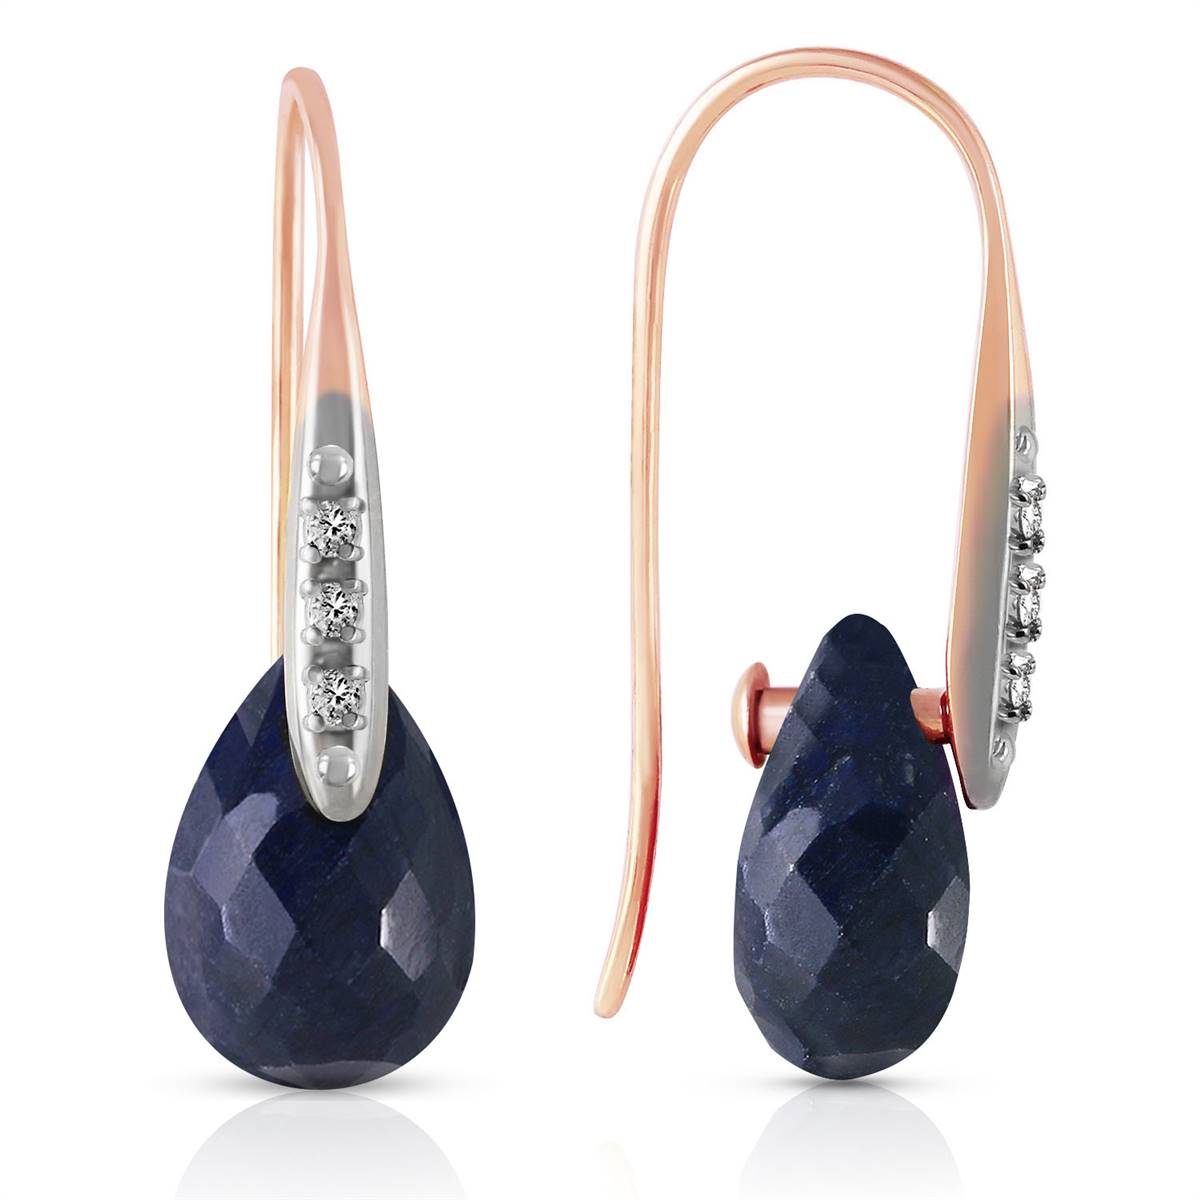 14K Solid Rose Gold Fish Hook Earrings w/ Diamonds & Dangling Dyed Sapphires